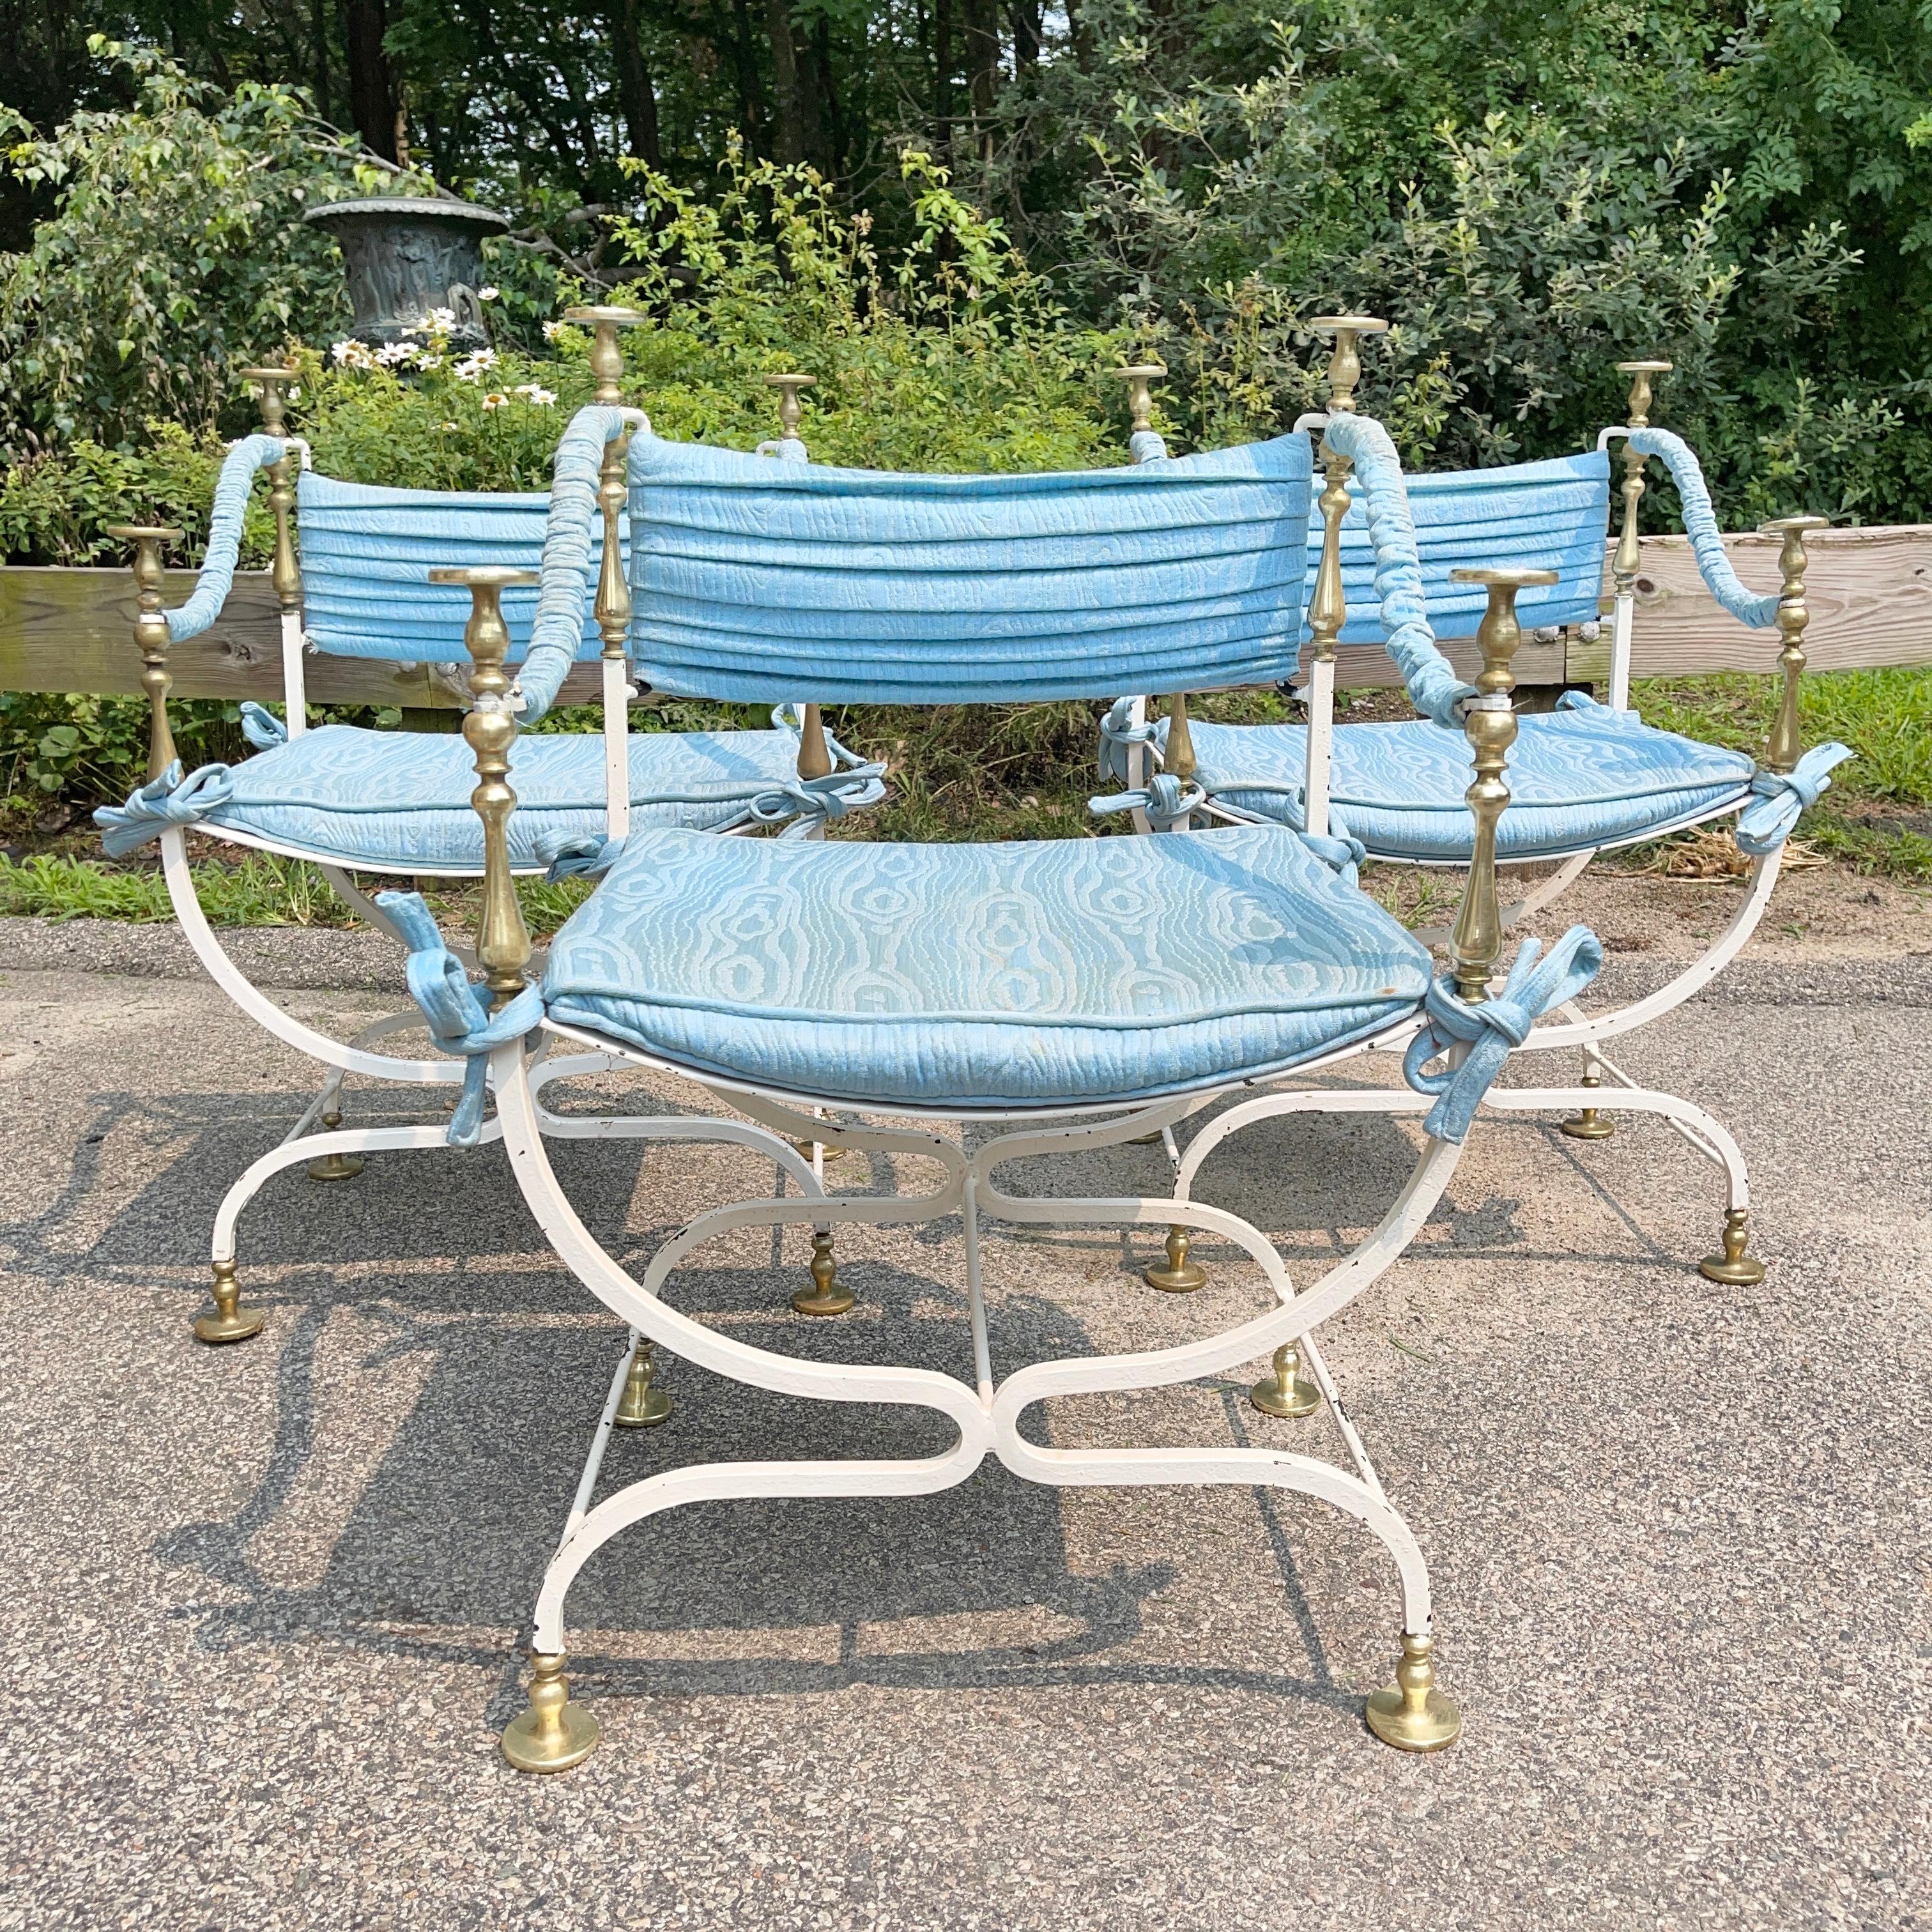 We have three matching mid-century Italian made brass and painted wrought iron Savonarola chairs.
Each chair frame is structurally sound and in its original white paint which is somewhat chippy.
Upon request we can have repainted (or powder coated)